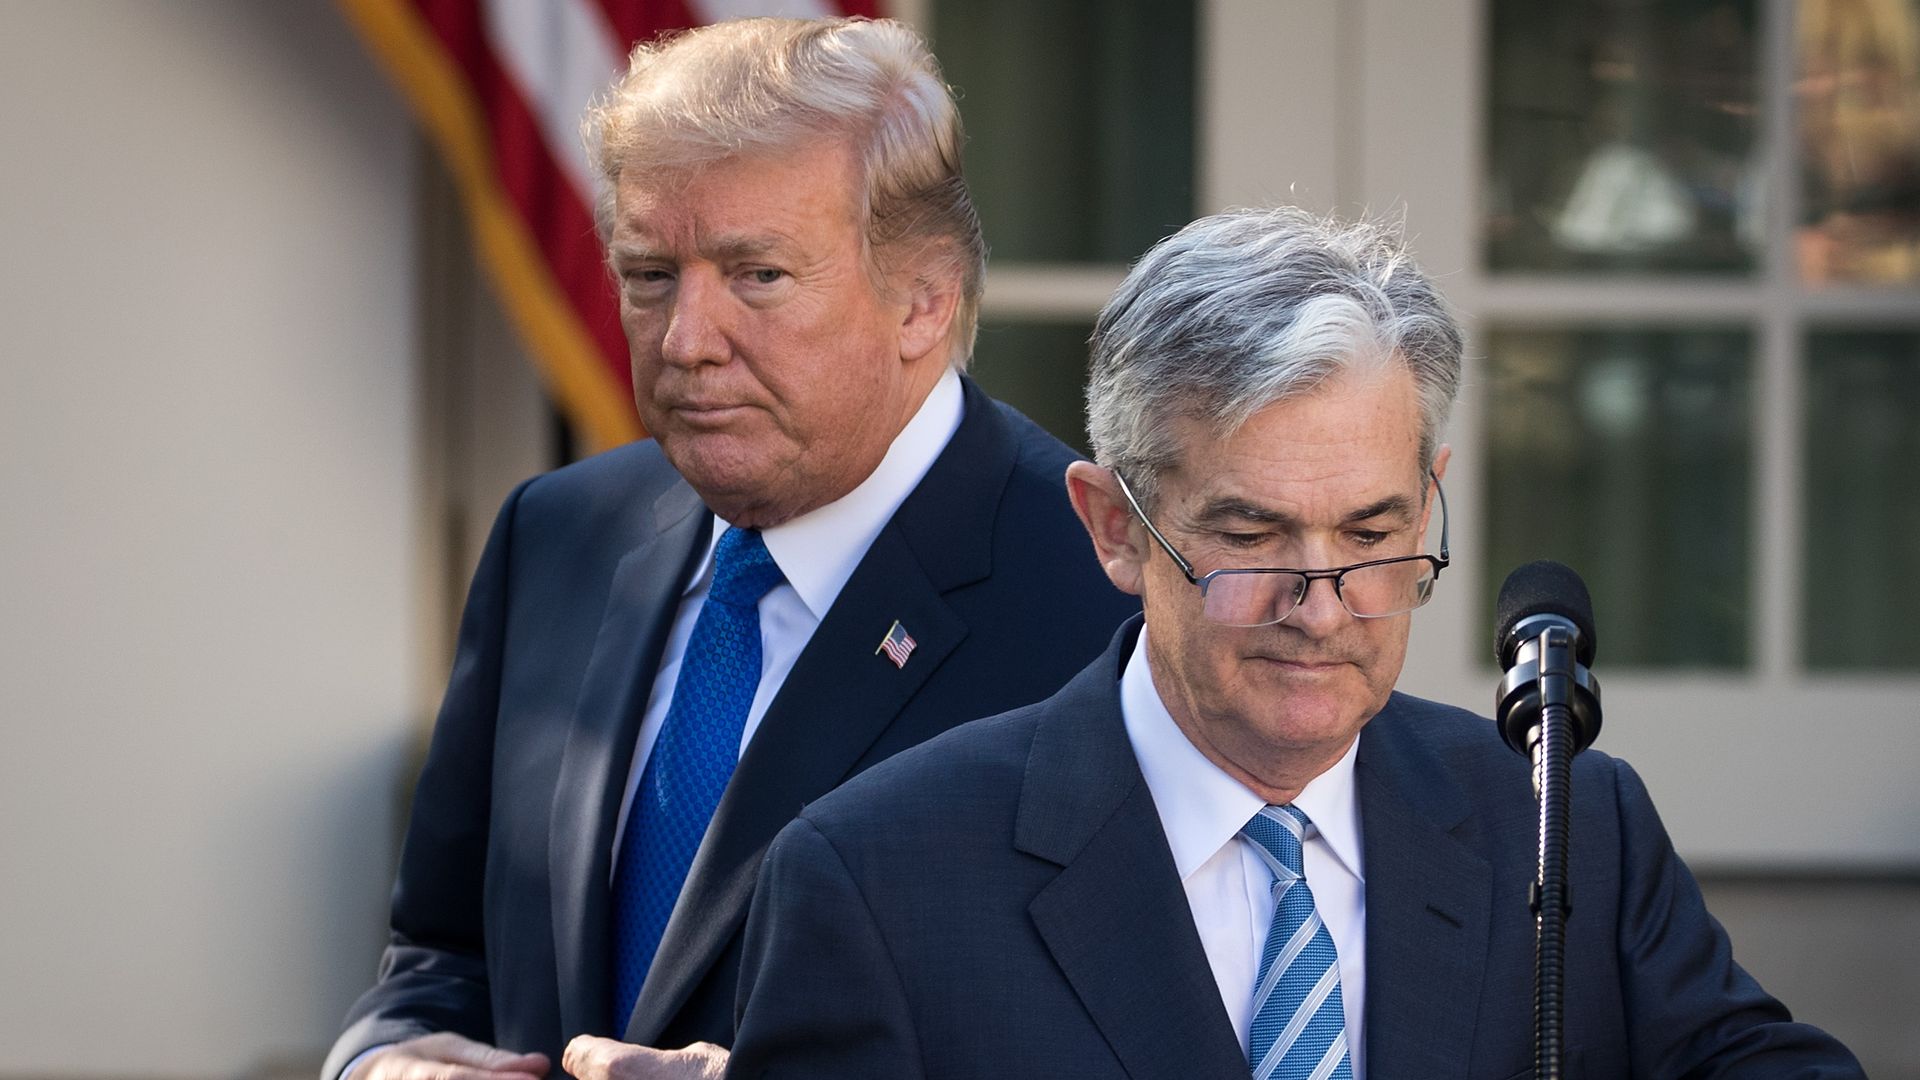 U.S. President Donald Trump looks on as Federal Reserve Jerome Powell takes to the podium during a press event in the Rose Garden at the White House, November 2, 2017 in Washington, DC. 